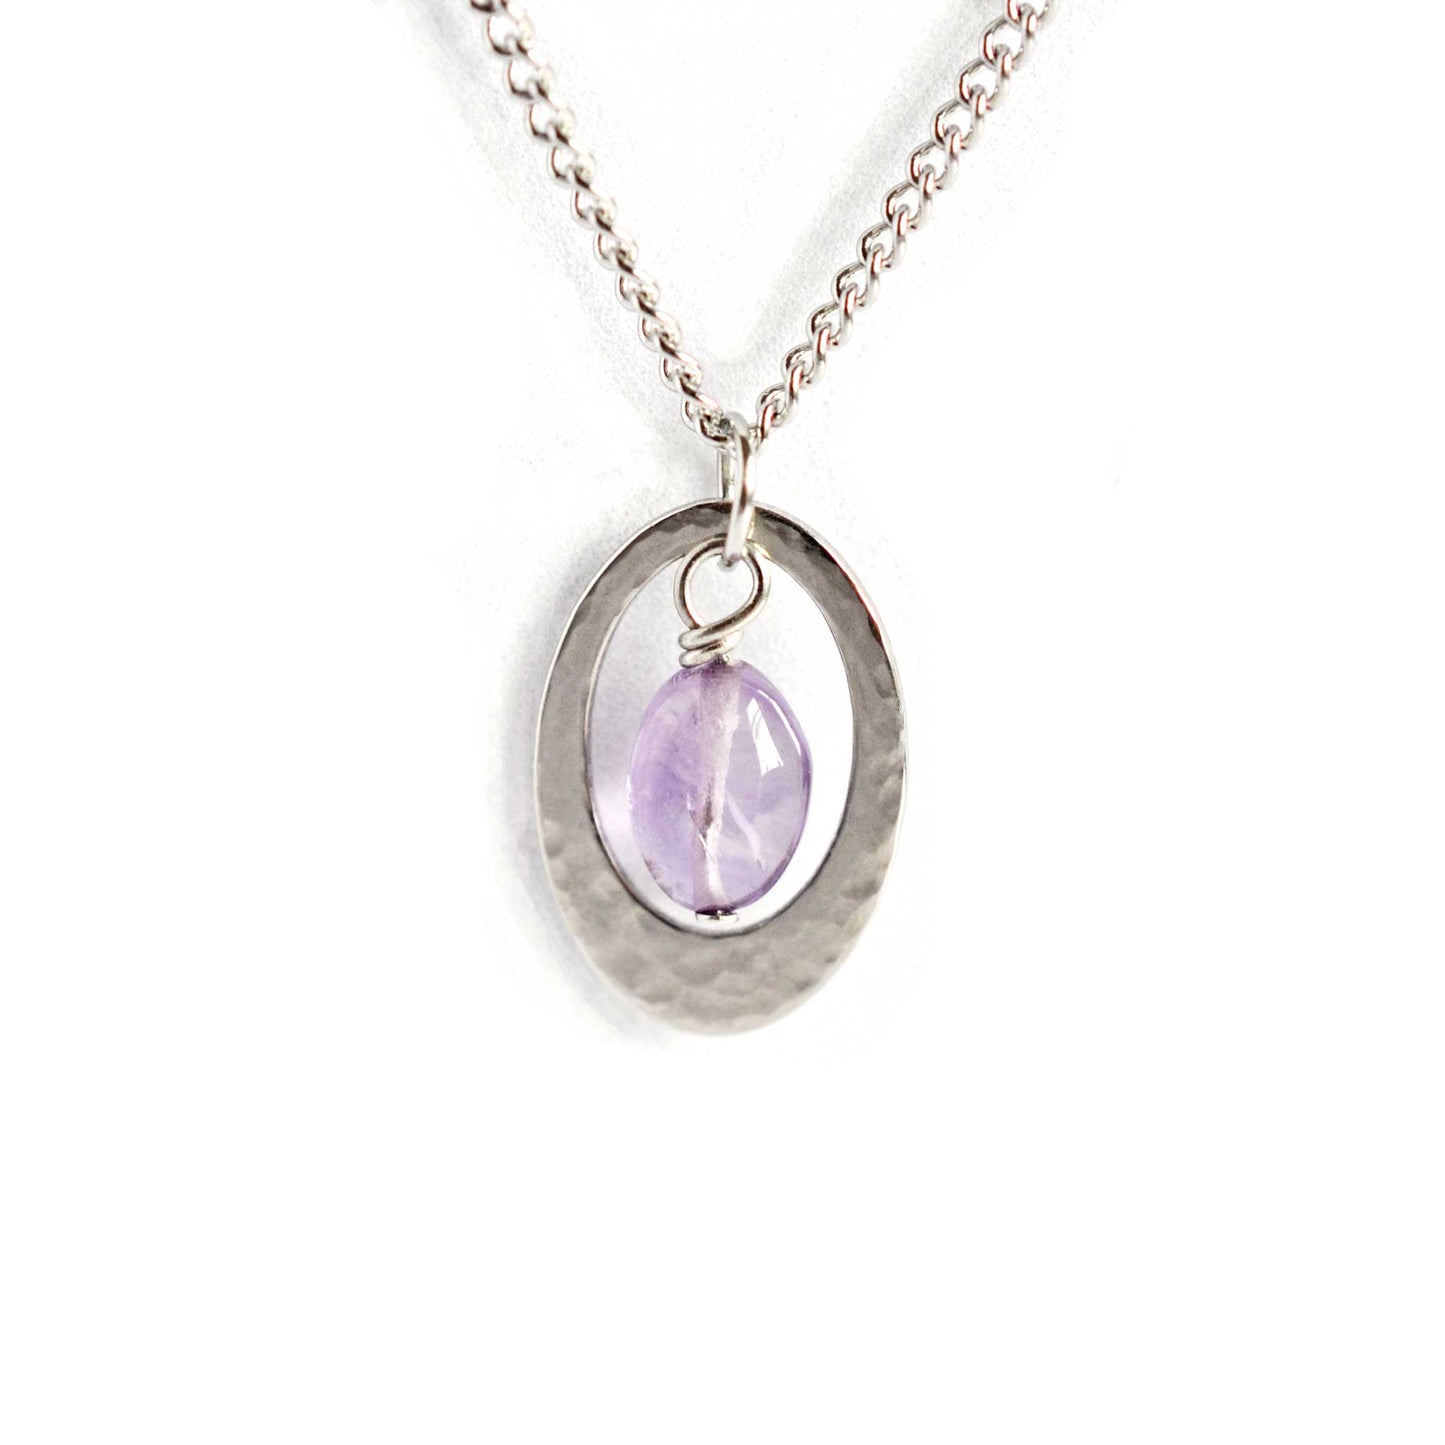 Amethyst and stainless steel oval pendant necklace on white background.